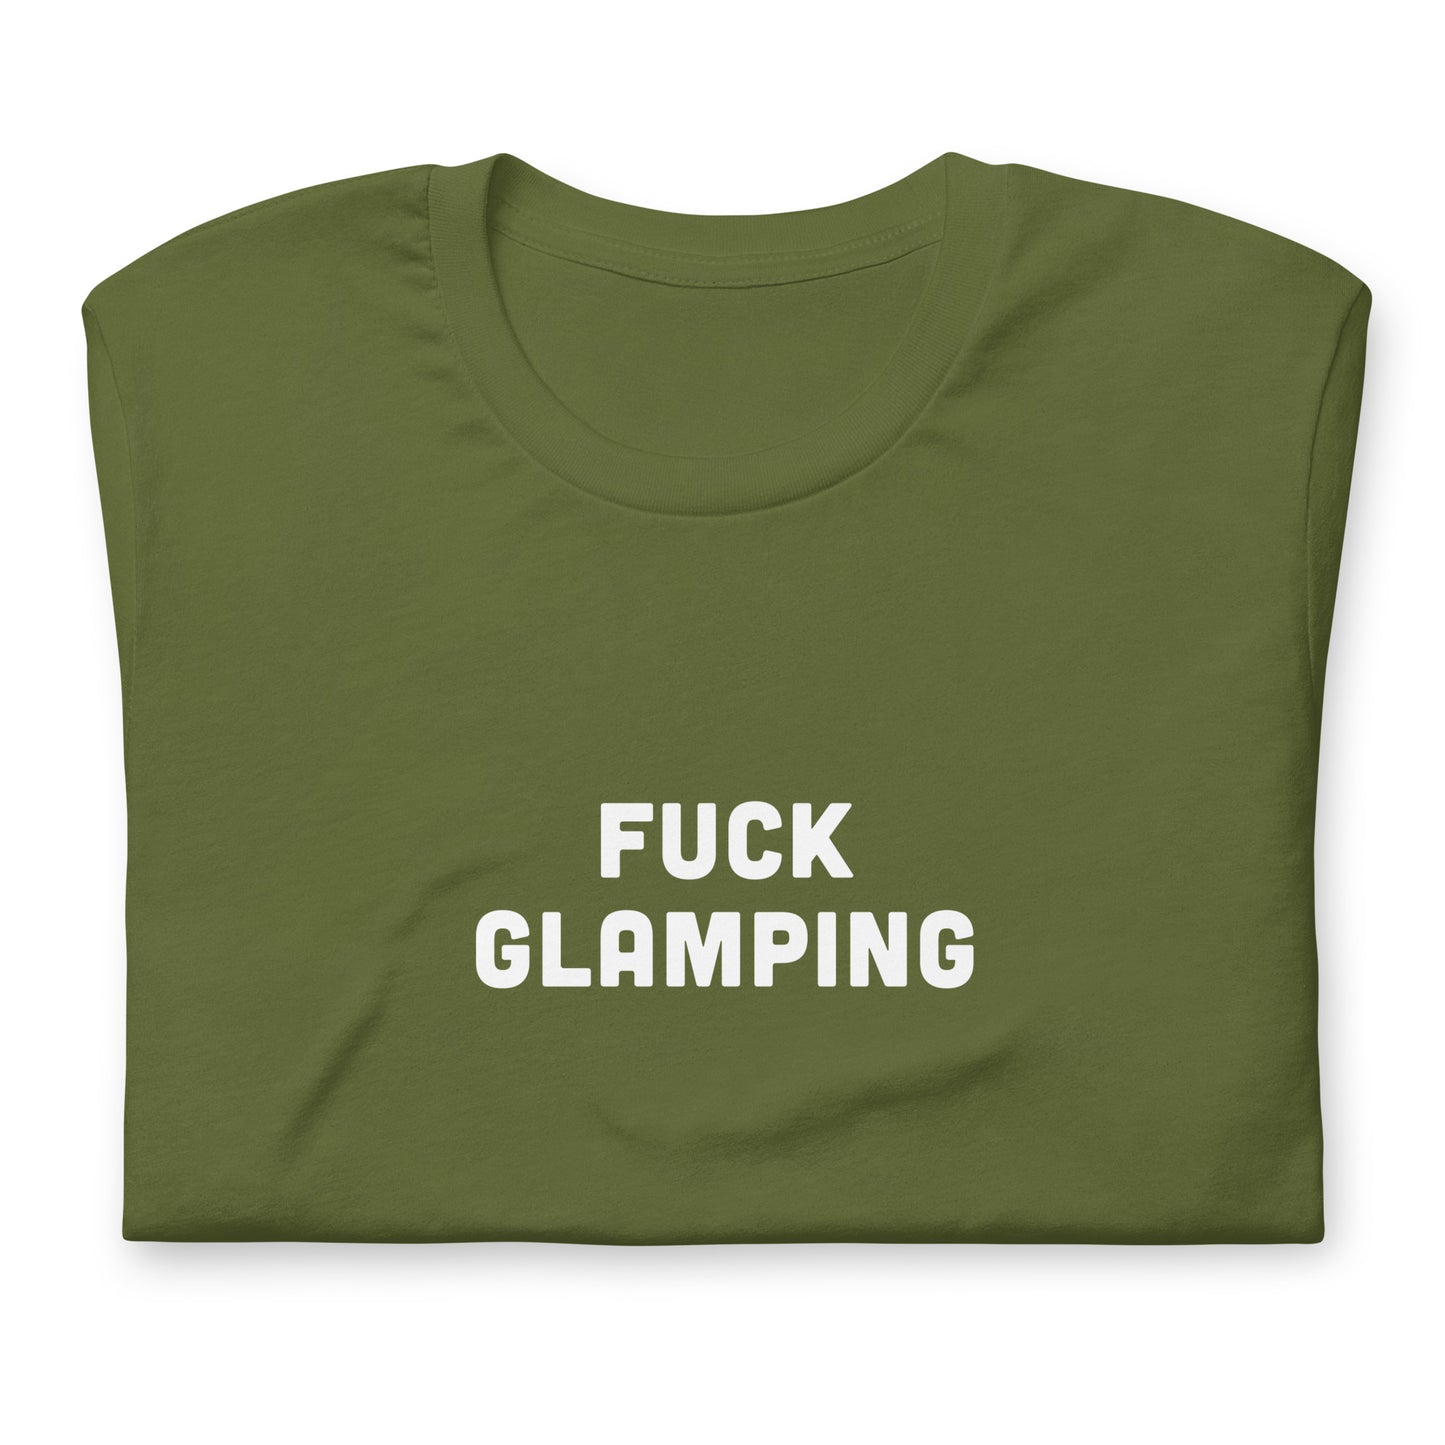 Fuck Glamping T-Shirt Size M Color Black